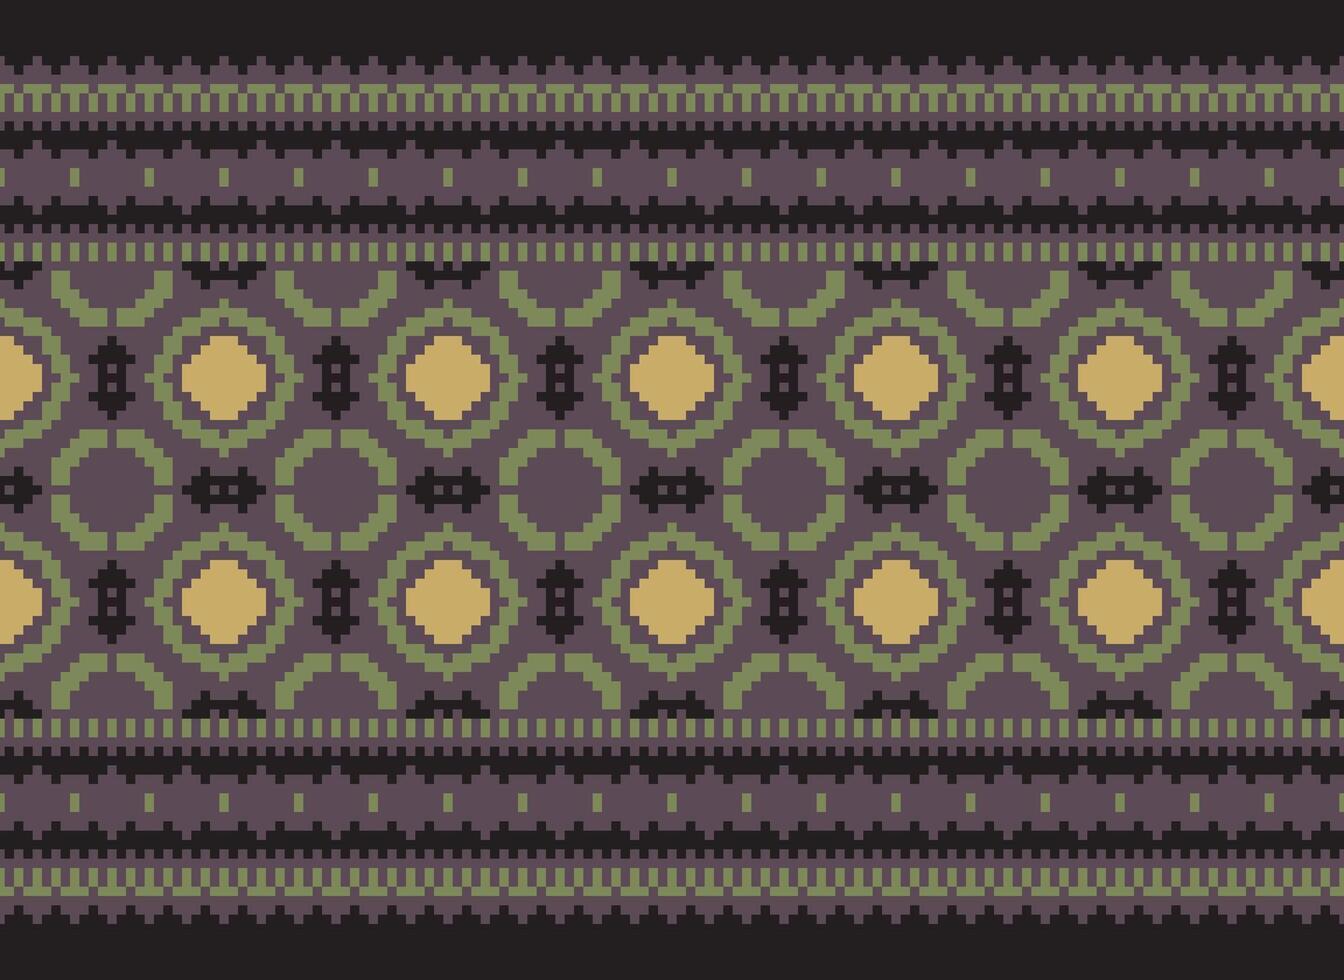 Knitted ethnic pattern, Vector cross stitch oriental background, Embroidery retro jacquard style, Purple pattern square native, Design for textile, fabric, carpet, rug, fibres